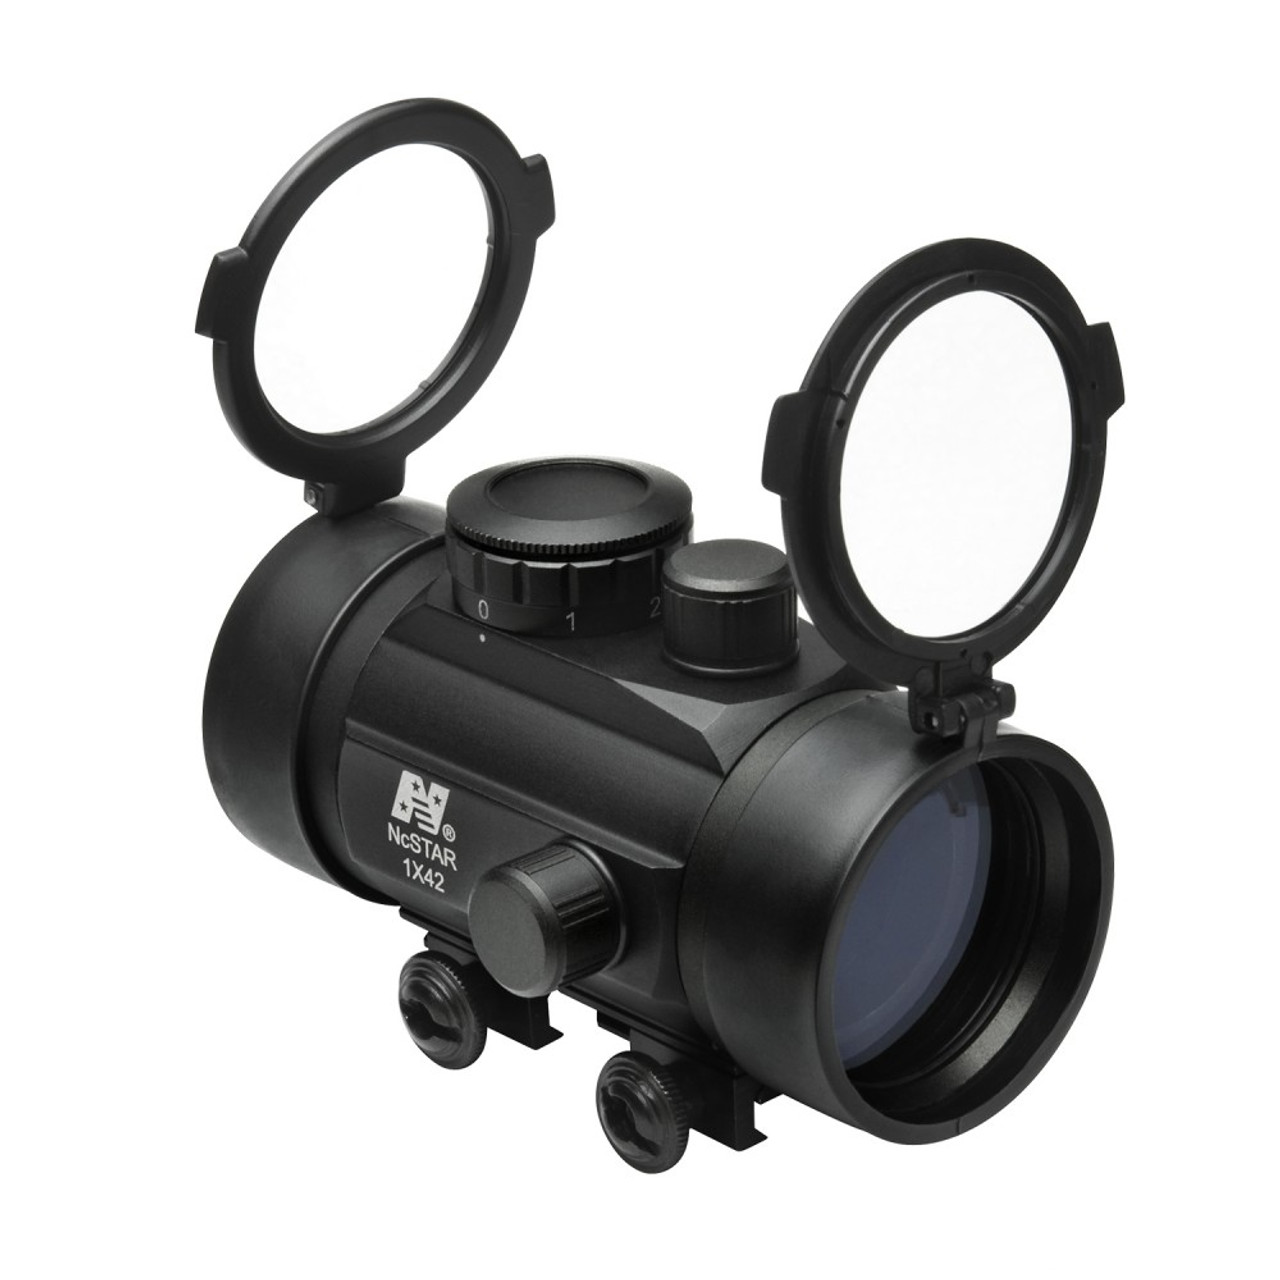 NcSTAR DBB142 1X42mm Red Dot Tube Reflex Optic With Weaver Base